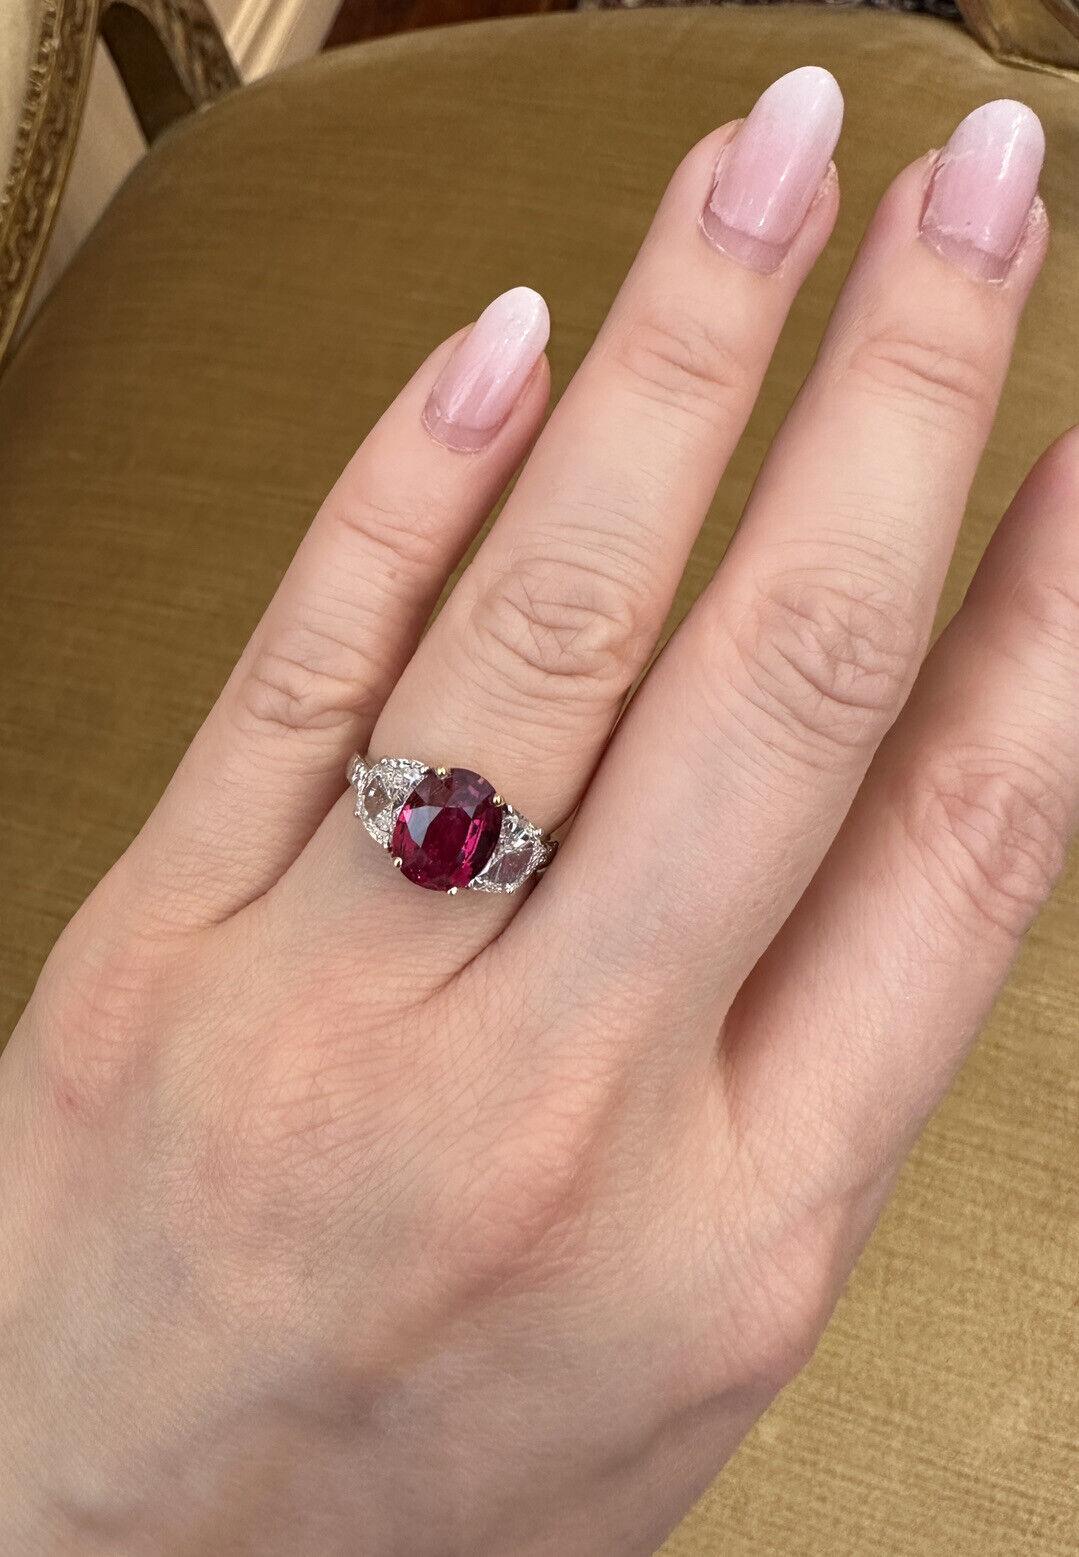 AGL CERTIFIED UNHEATED 3.03 carat Oval Ruby Three-Stone Ring in Platinum

Oval Ruby Three-Stone Ring features an Oval Mixed cut Red Ruby accented by Two Half Moon cut Diamonds set in Platinum. The ruby originates from Mozambique and is